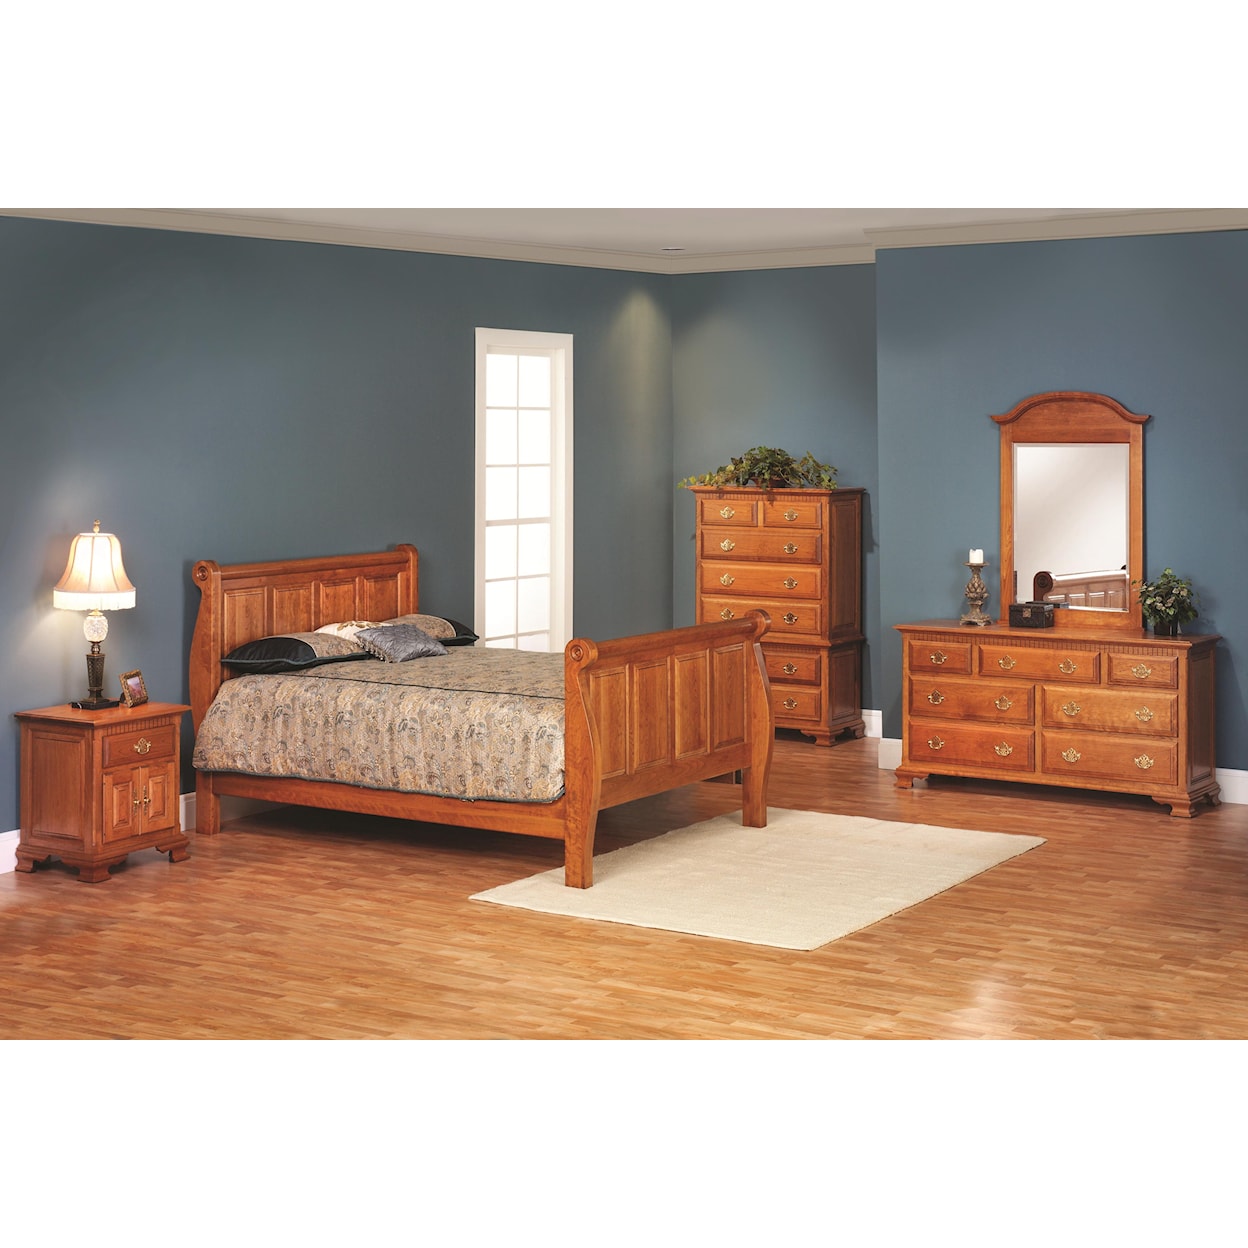 Millcraft Victorias Tradition Full Sleigh Bedroom Group